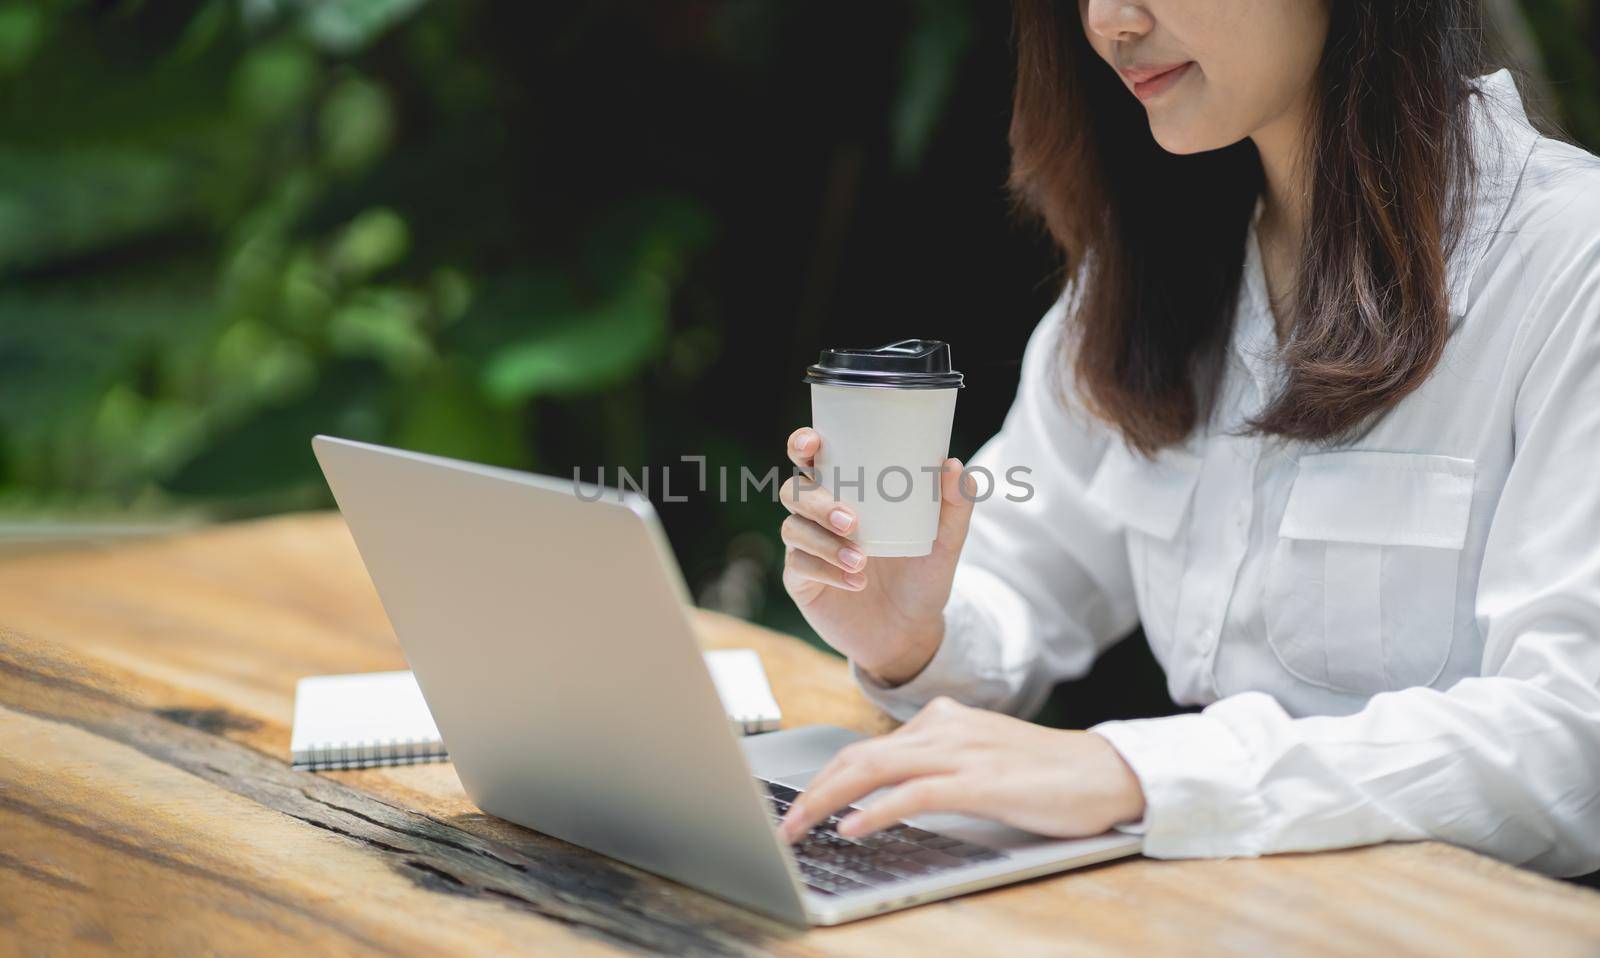 Business woman working on laptop and holding cup hot coffee on wooden table with a cup of coffee. Business concept work form home anywhere. by Wmpix